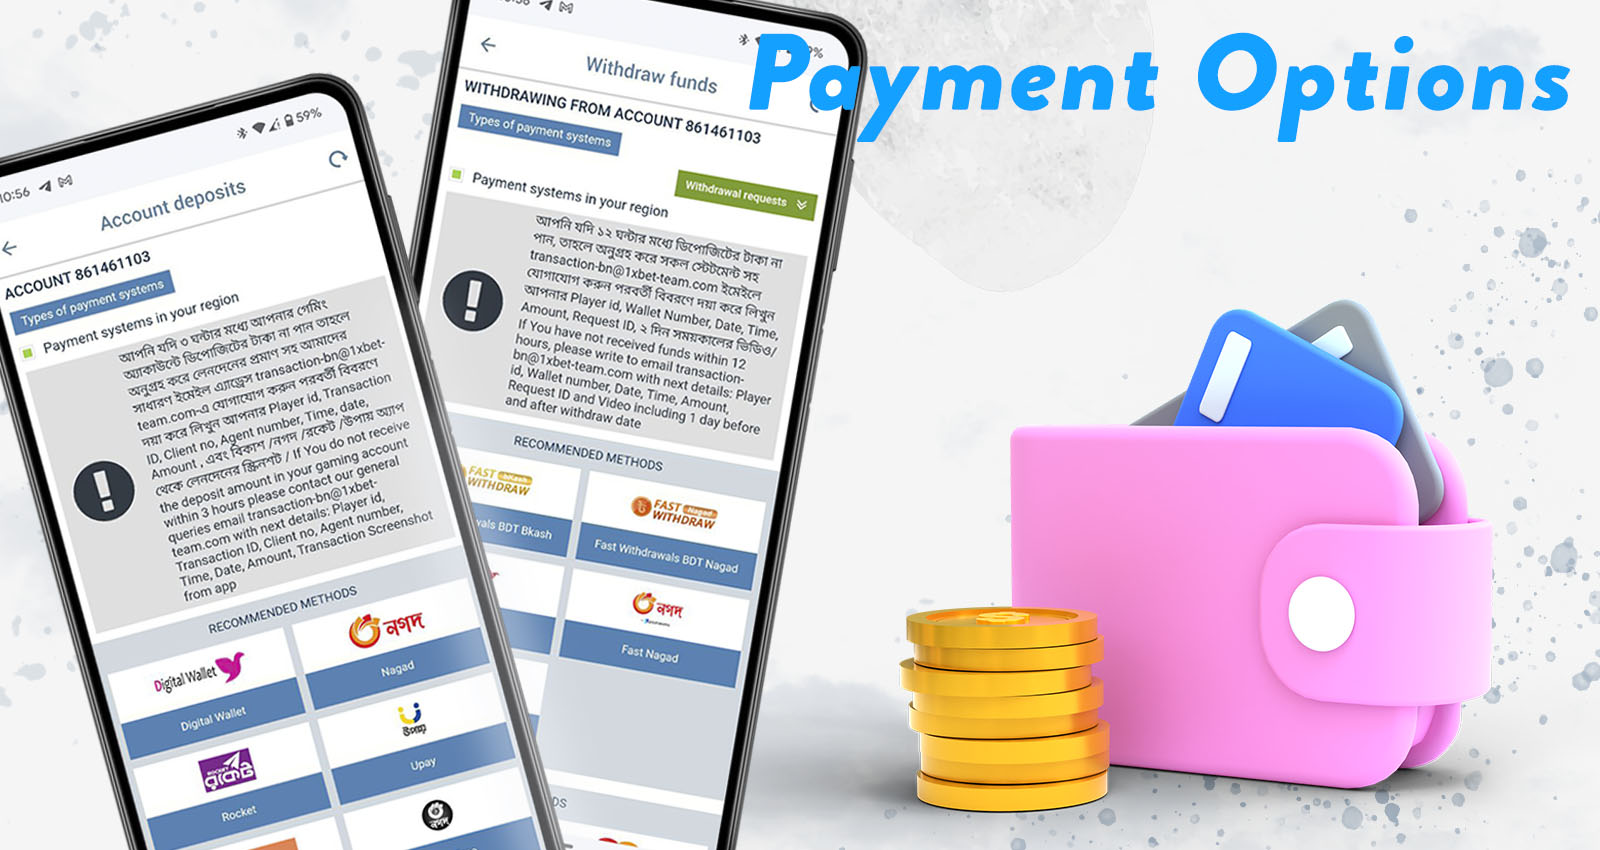 The convenience of instant deposits and withdrawals without any fees